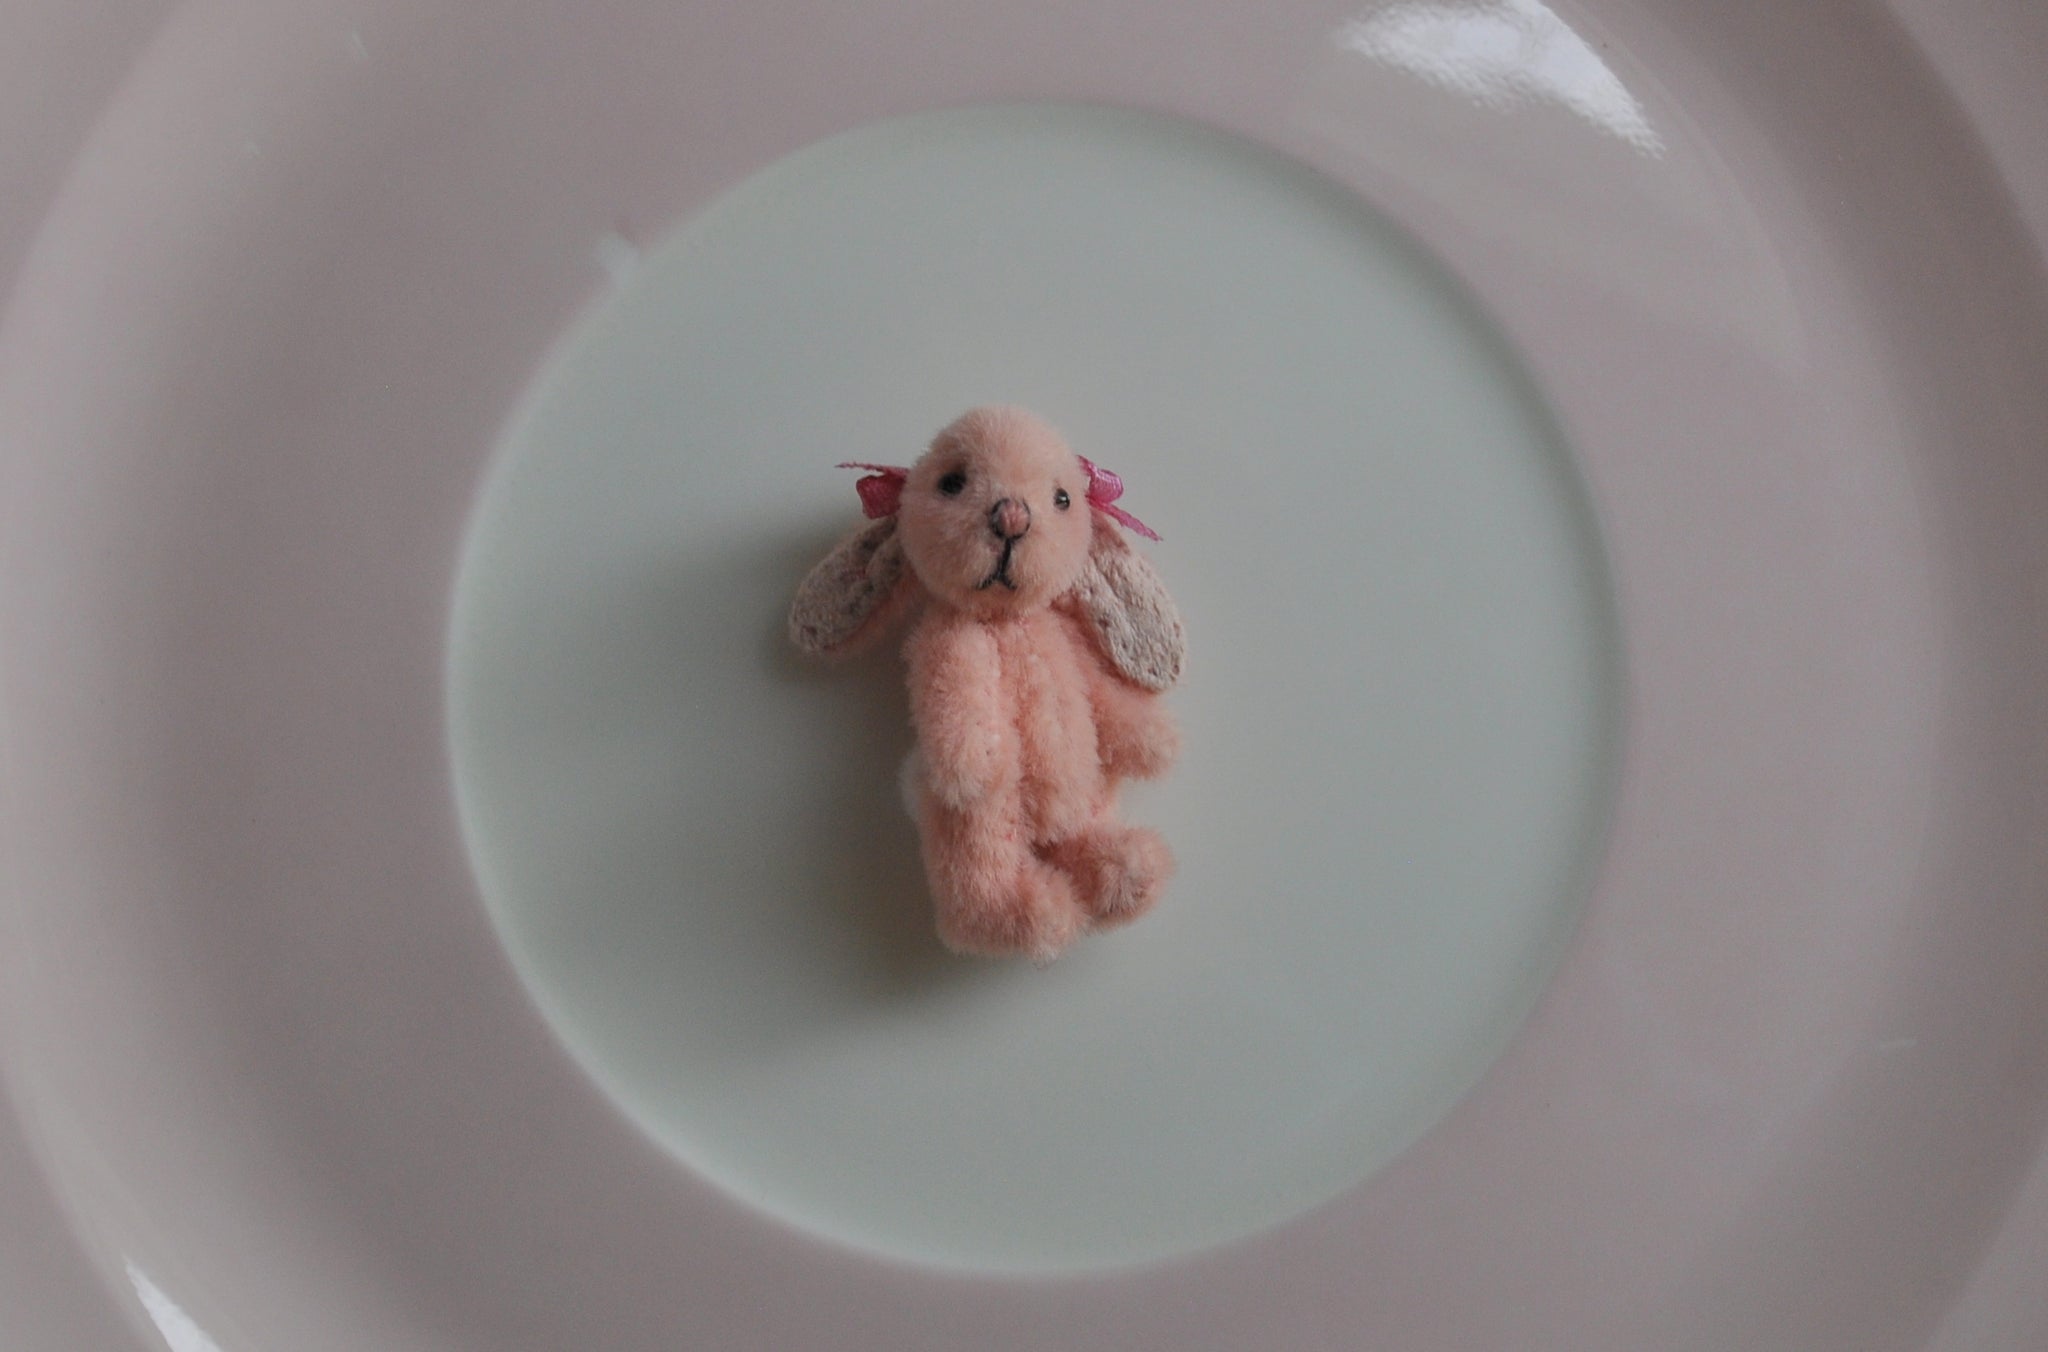 Fully Jointed "Pink Romance" Bunny by Anna Braun